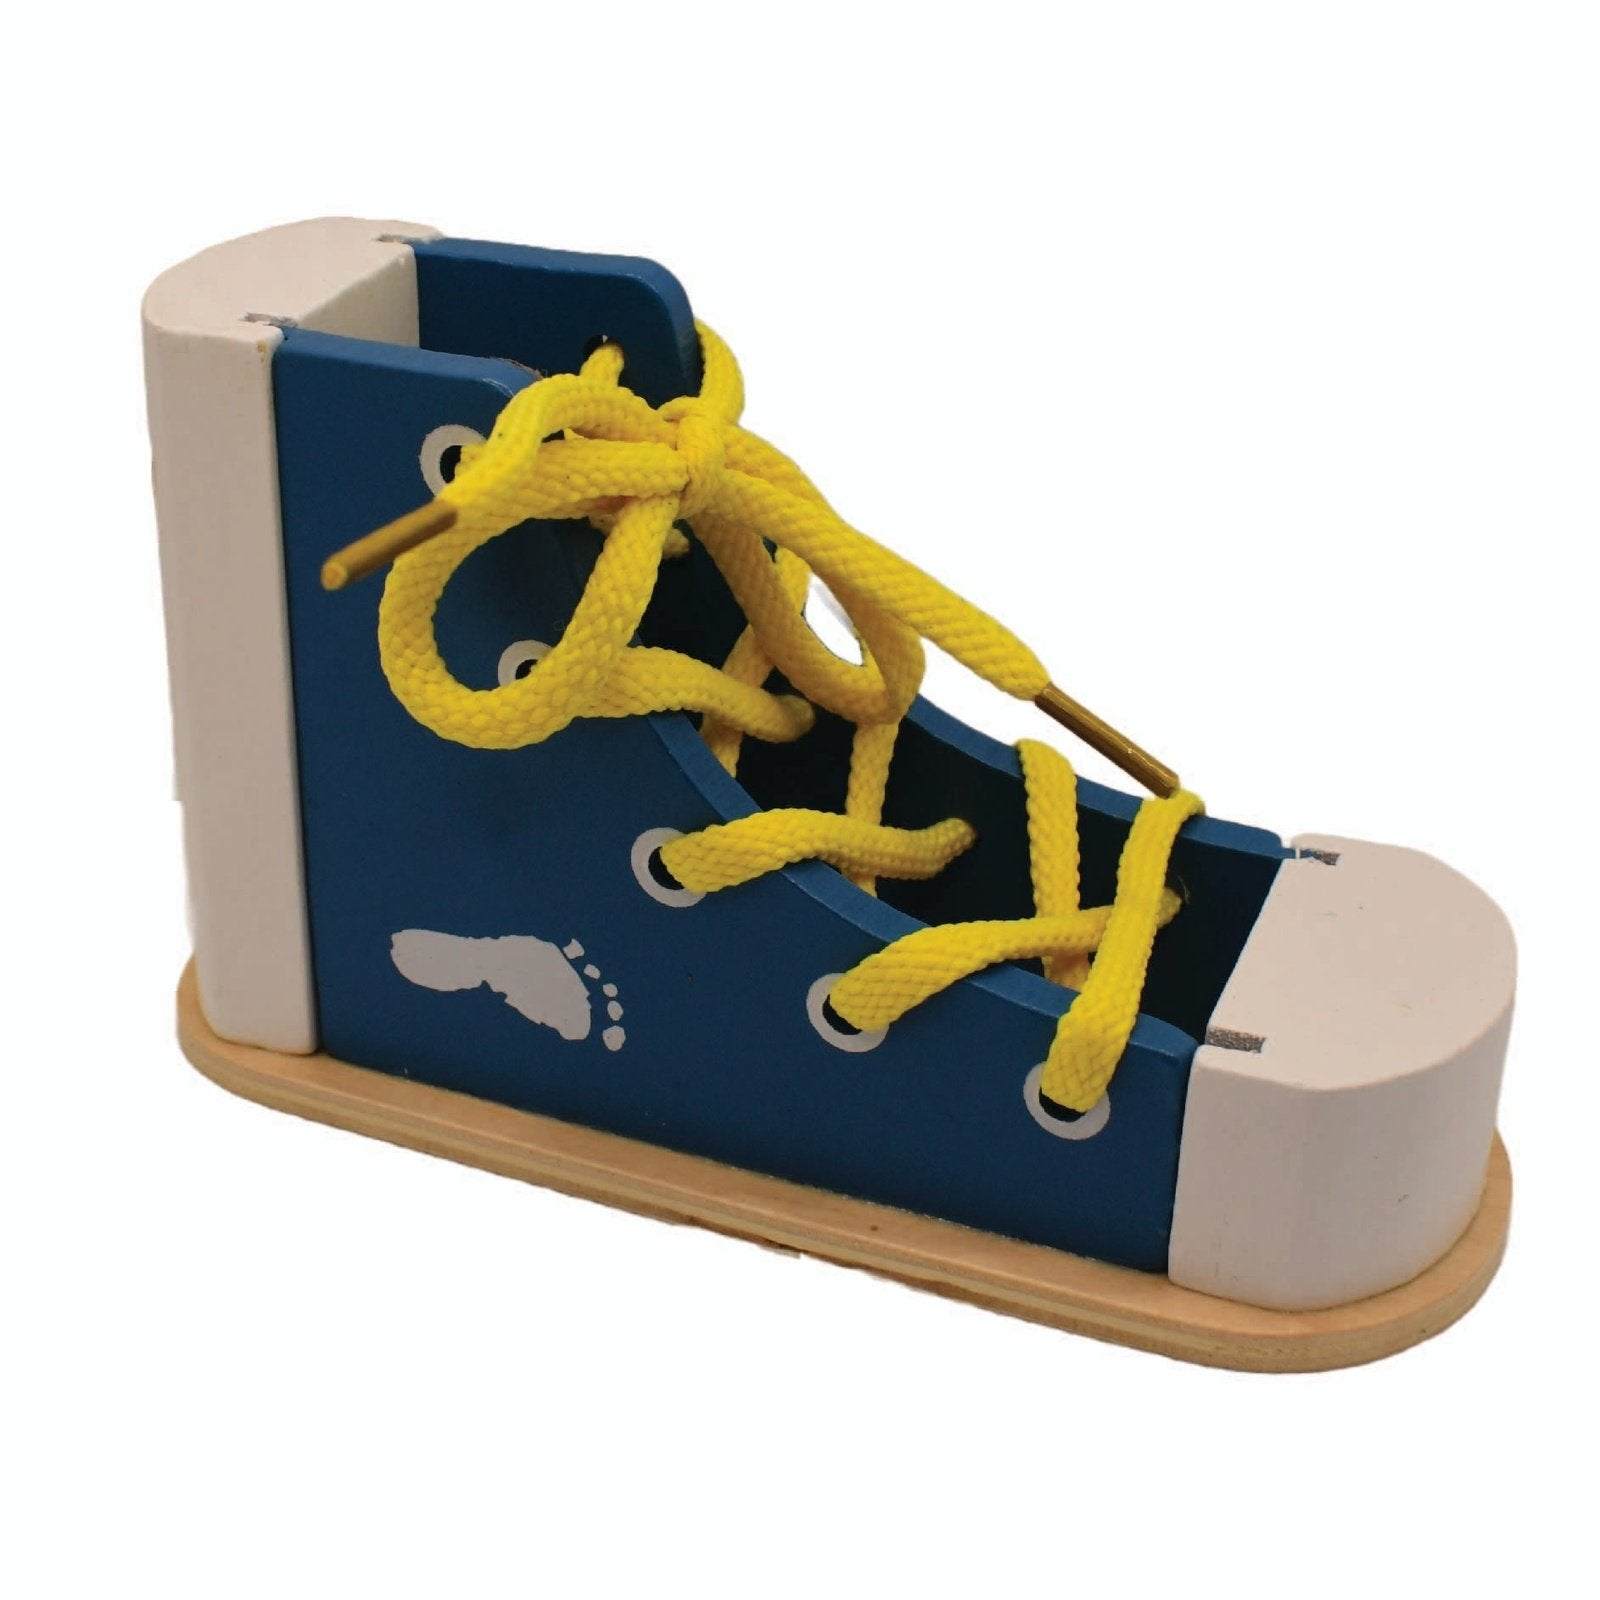  Wooden Shoe | Wooden Lacing Shoe | Wooden Lacing Shoe | Wooden Shoe toy